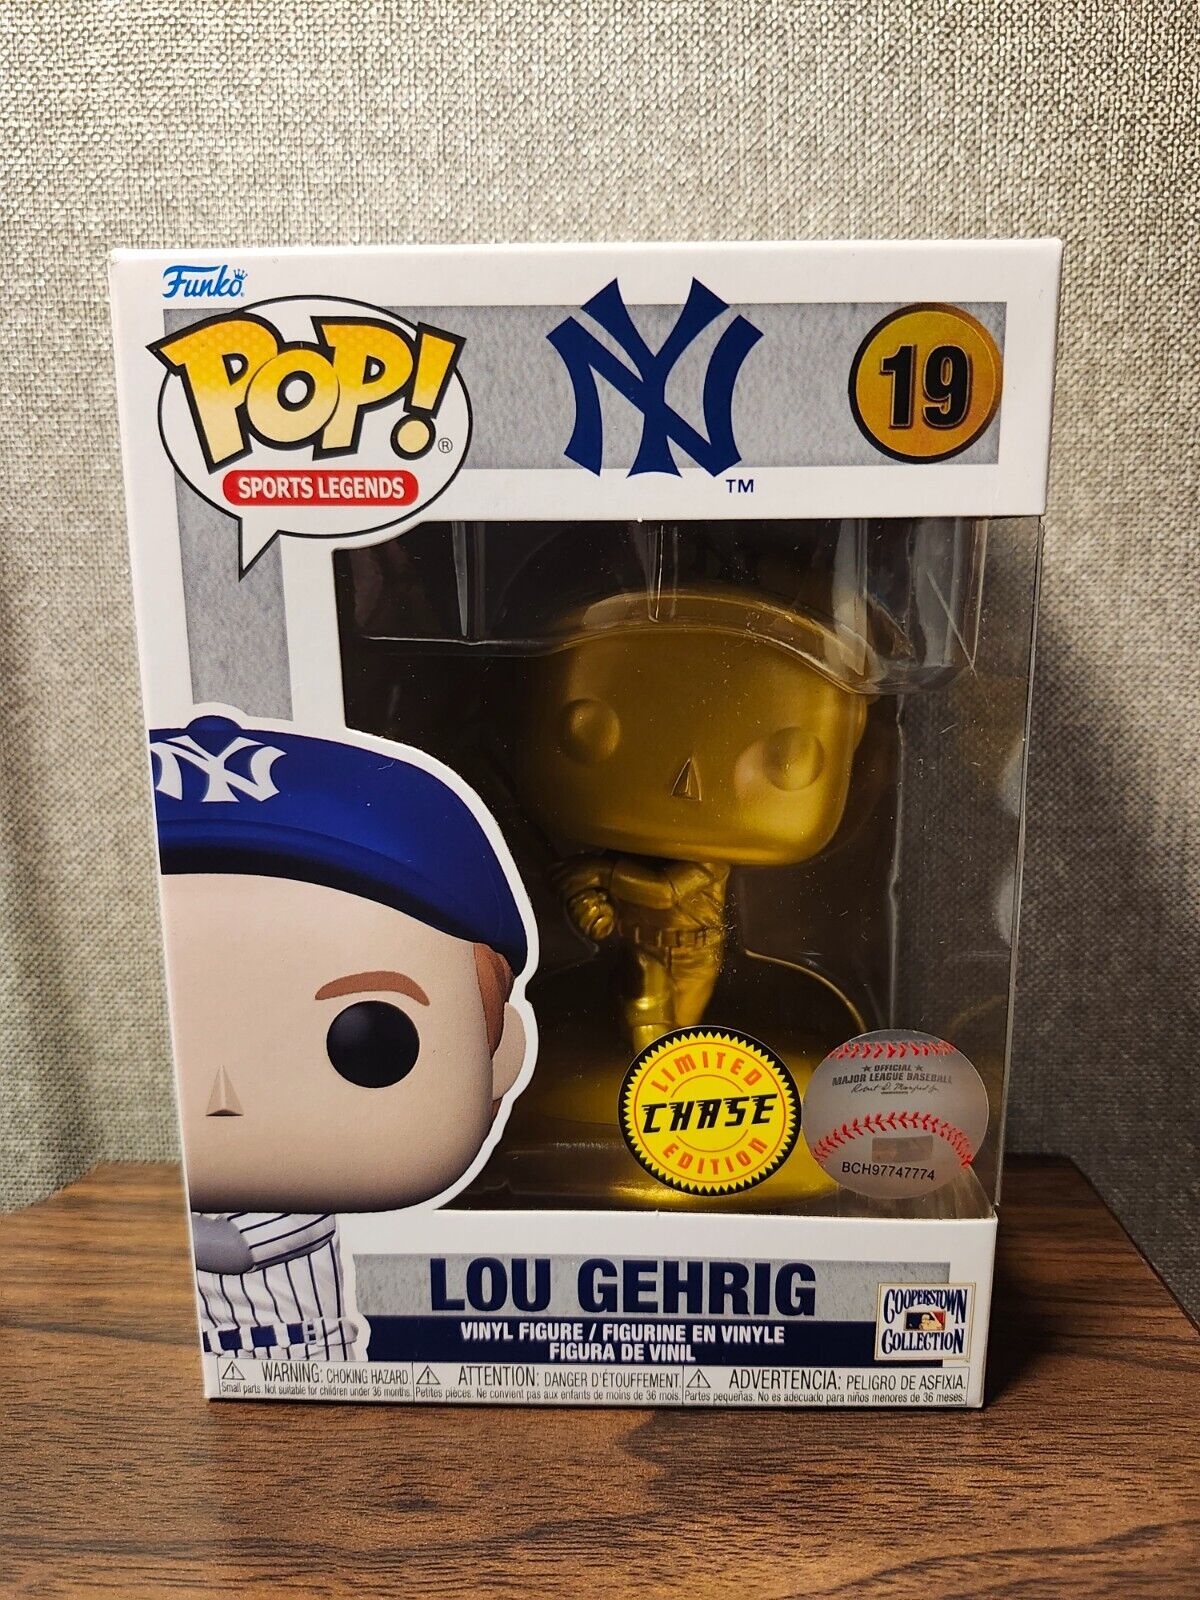 New Lou gehrig #19 #NewYorkYankees #Yankees, limited edition, chase funko,